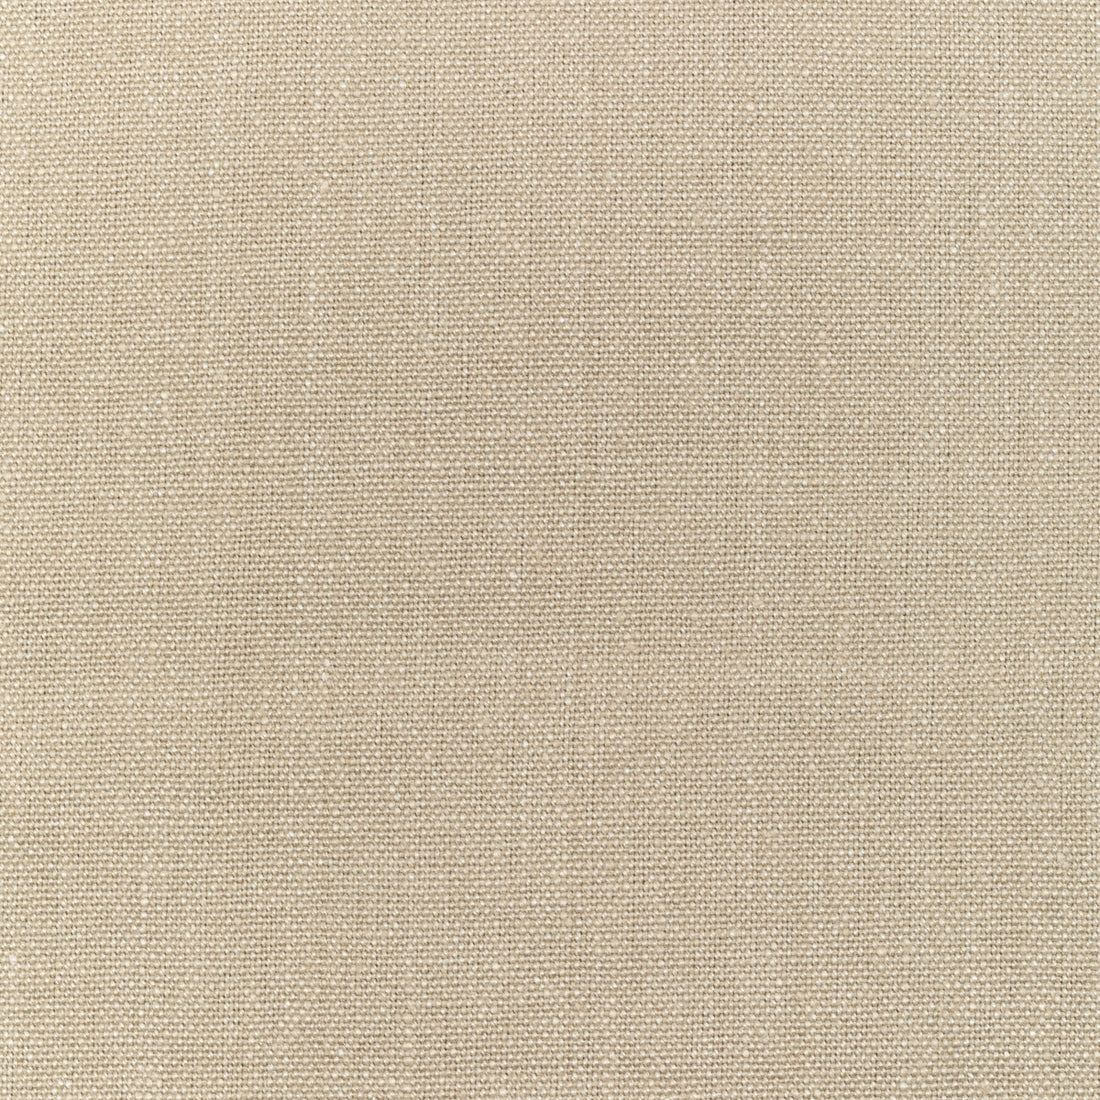 Watermill fabric in pebble color - pattern 30421.116.0 - by Kravet Basics in the Perfect Plains collection